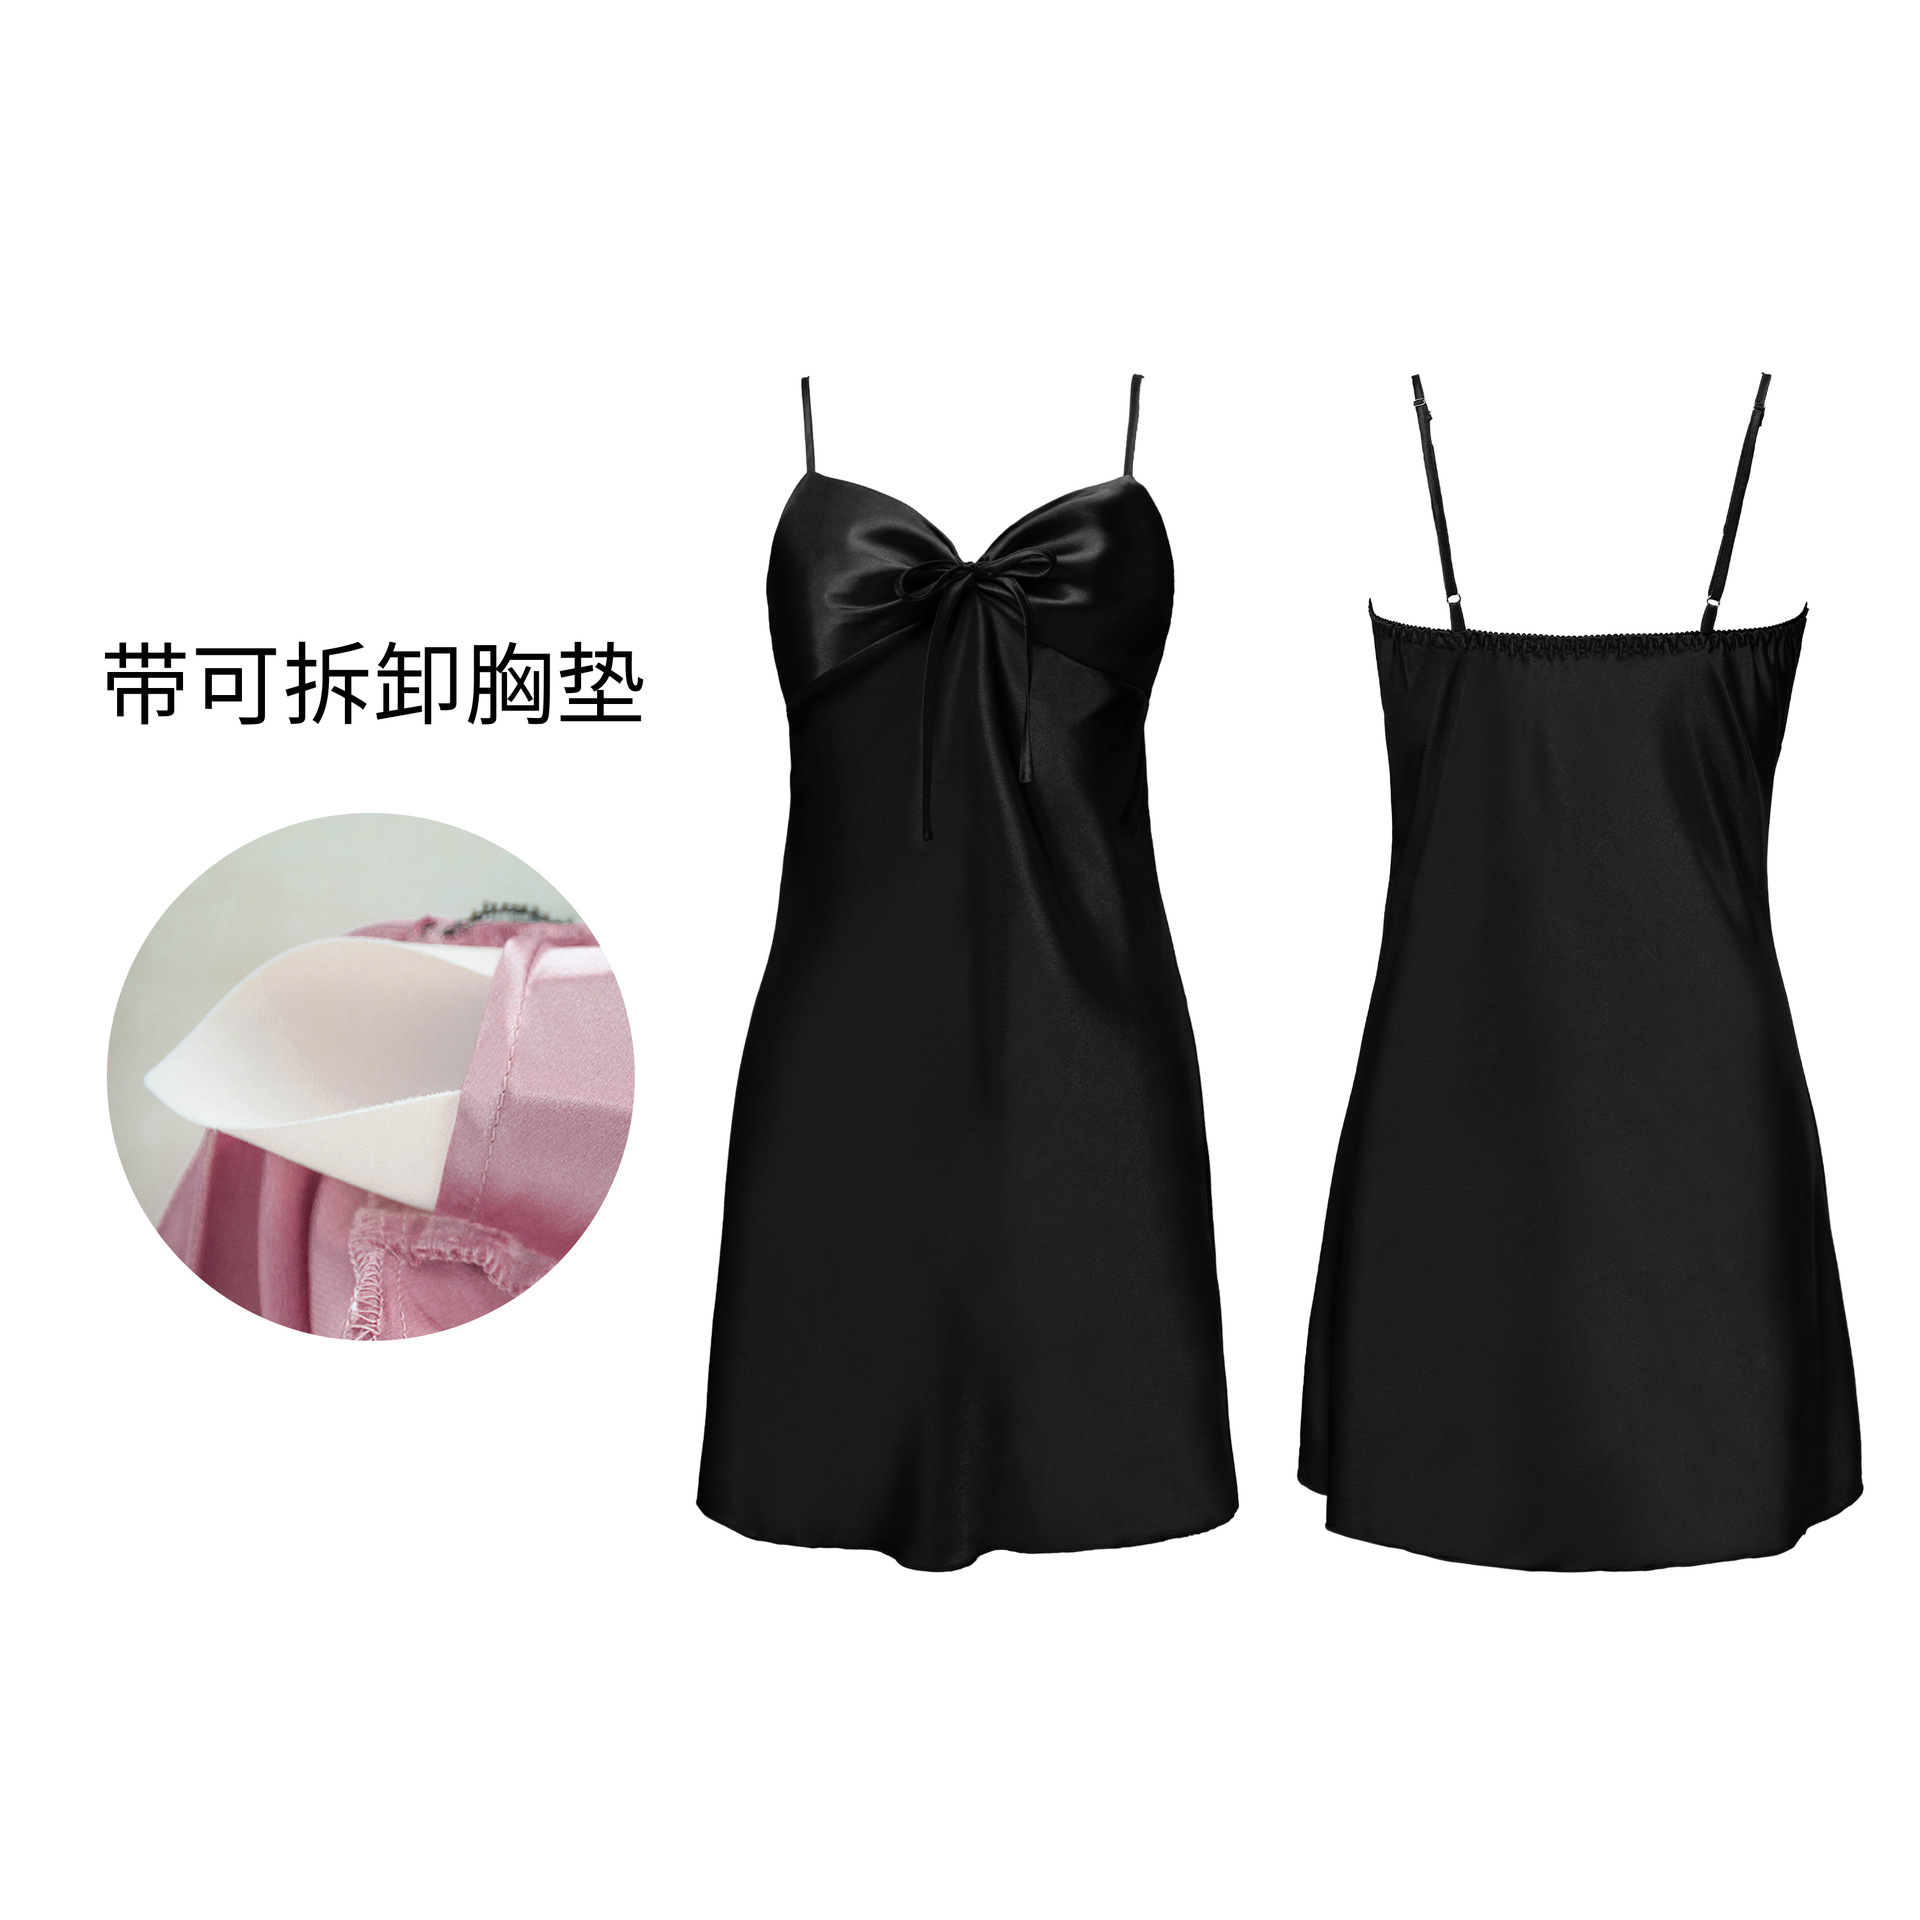 3239--Backless suspender short nightgown with breast pads for women's home wear